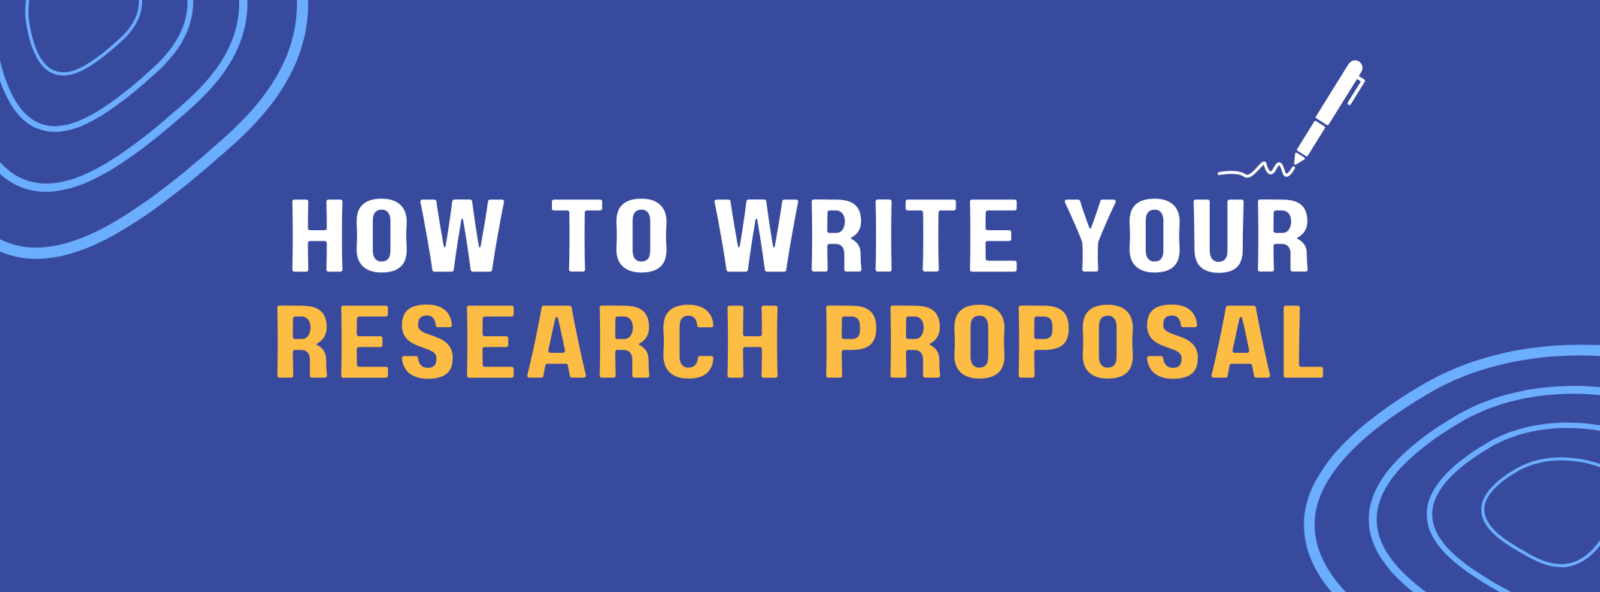 How to Write Your Research Proposal